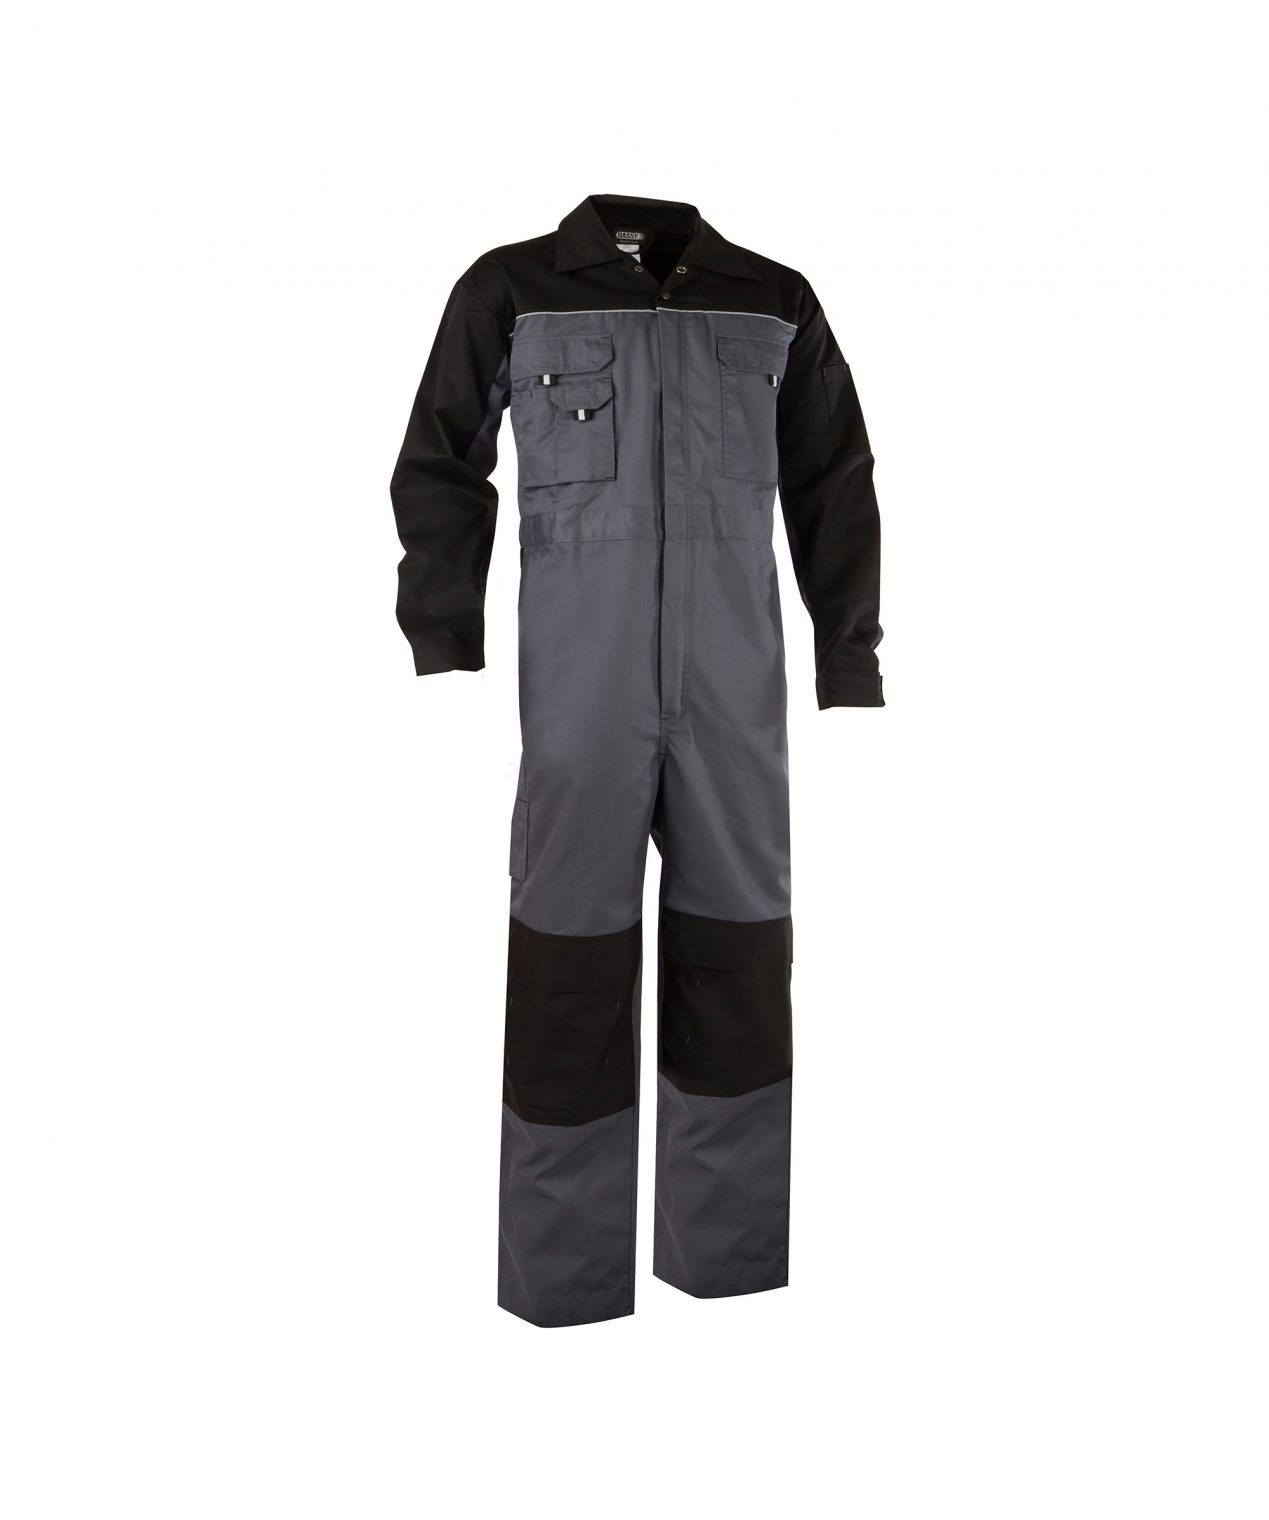 cannes two tone overall with knee pockets cement grey black front